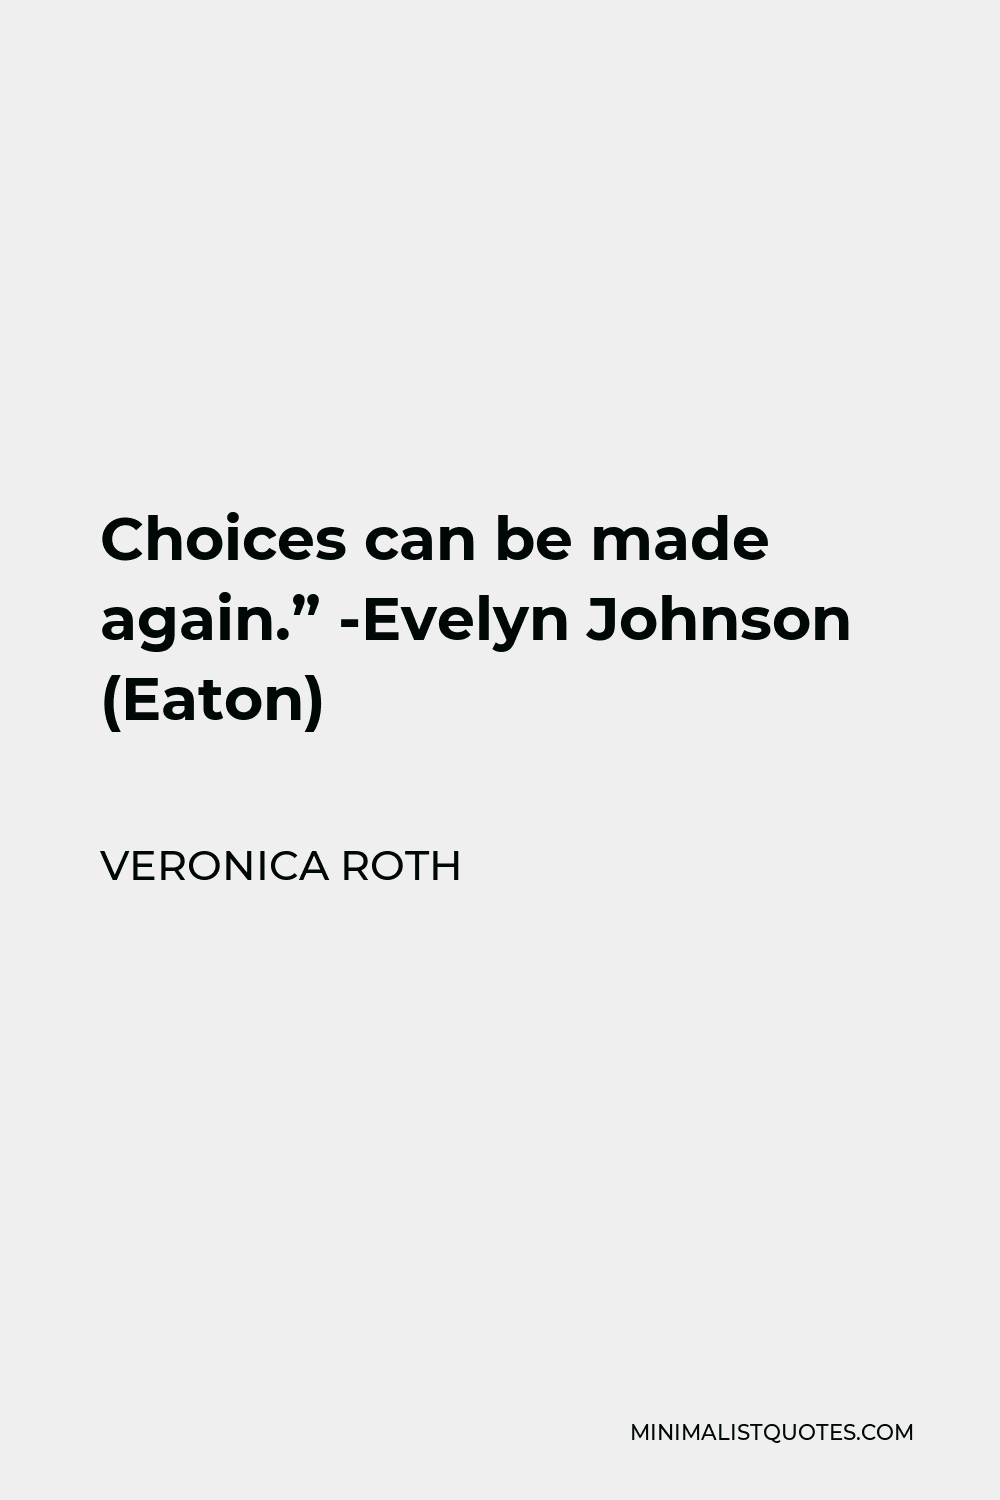 Veronica Roth Quote - Choices can be made again.” -Evelyn Johnson (Eaton)